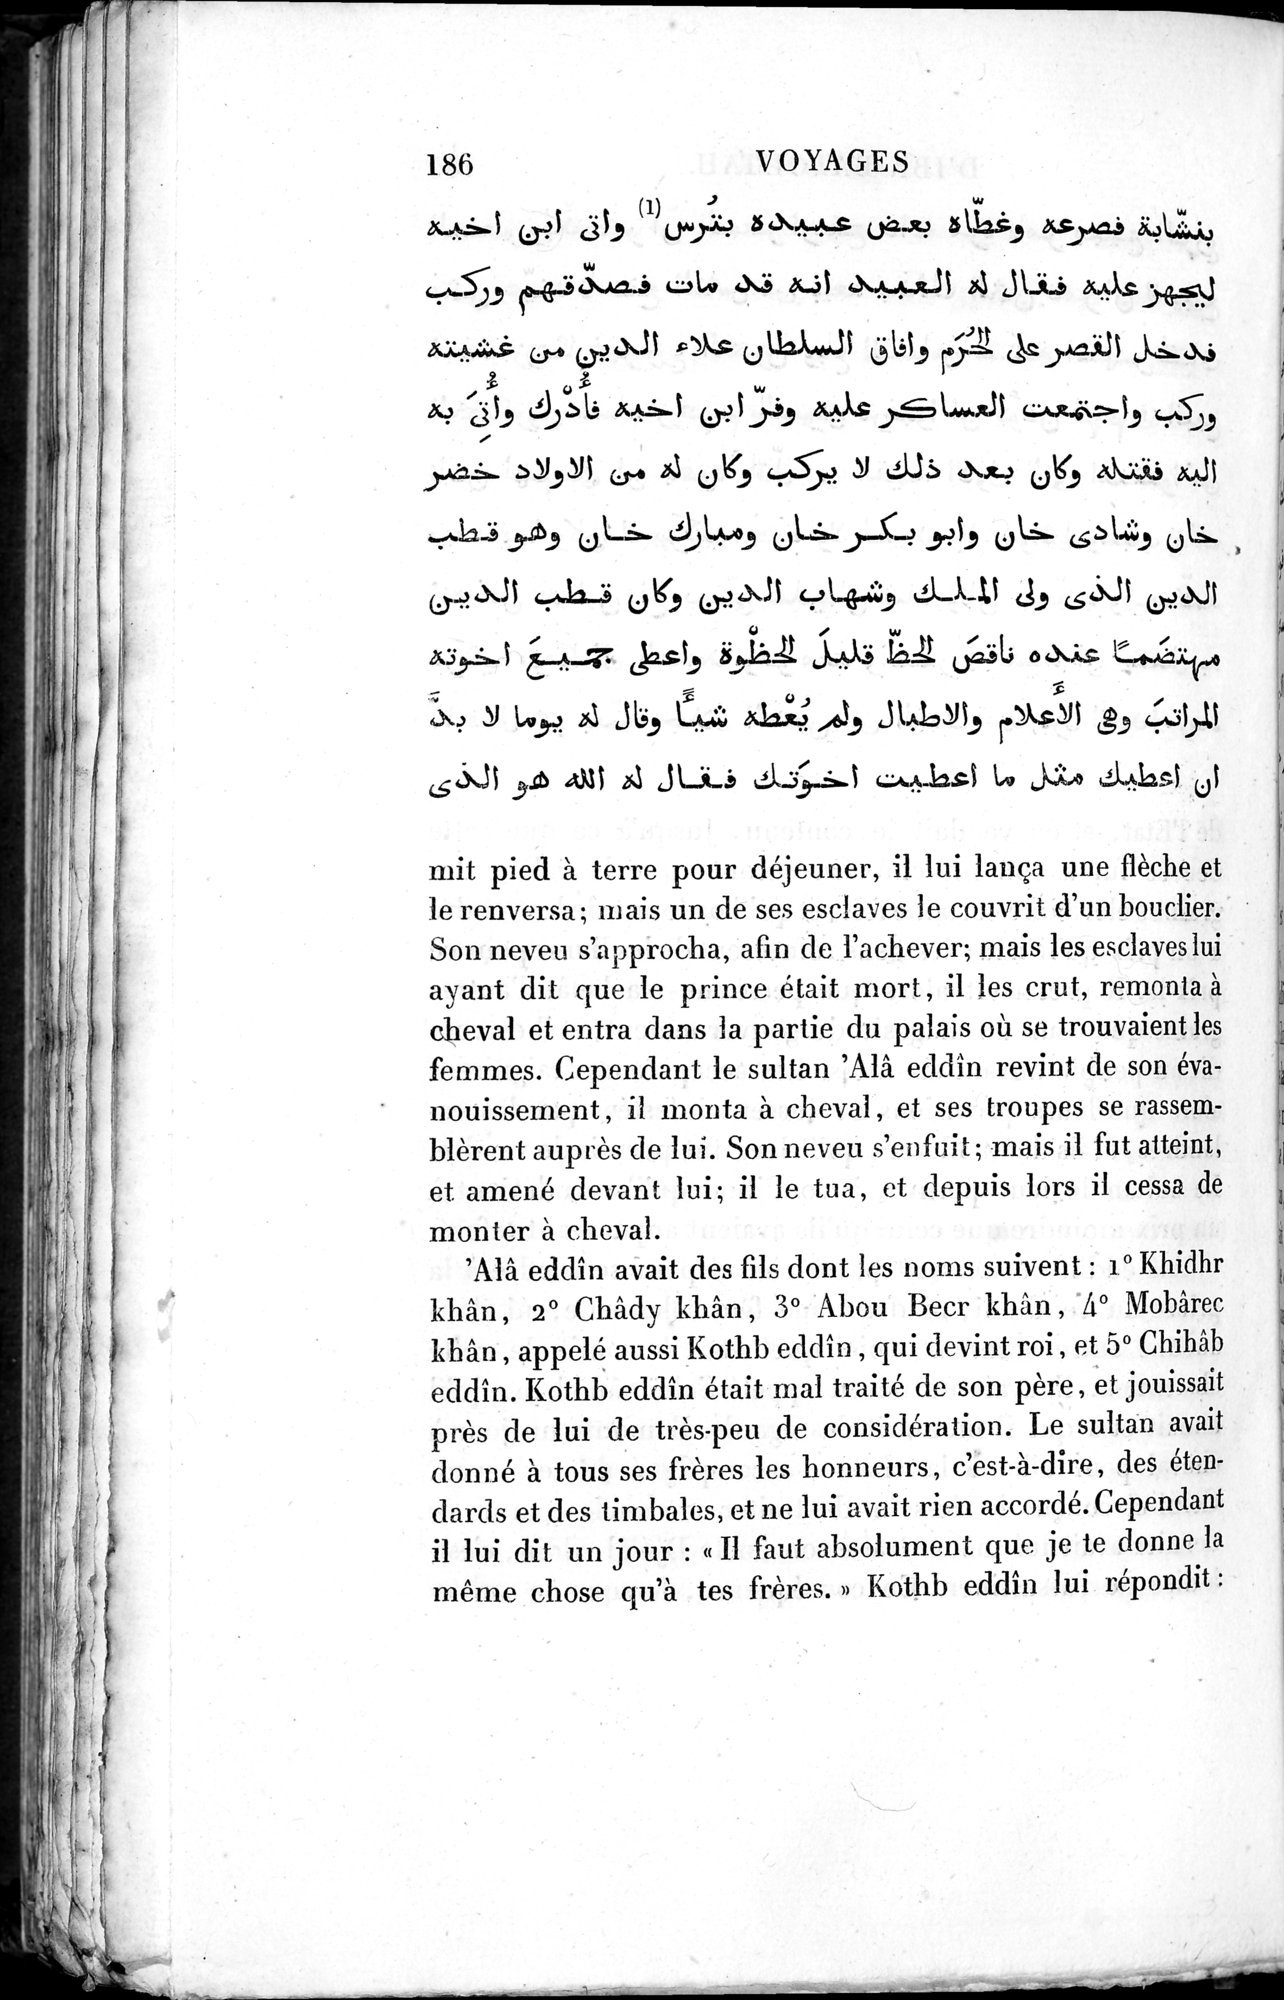 Voyages d'Ibn Batoutah : vol.3 / Page 226 (Grayscale High Resolution Image)